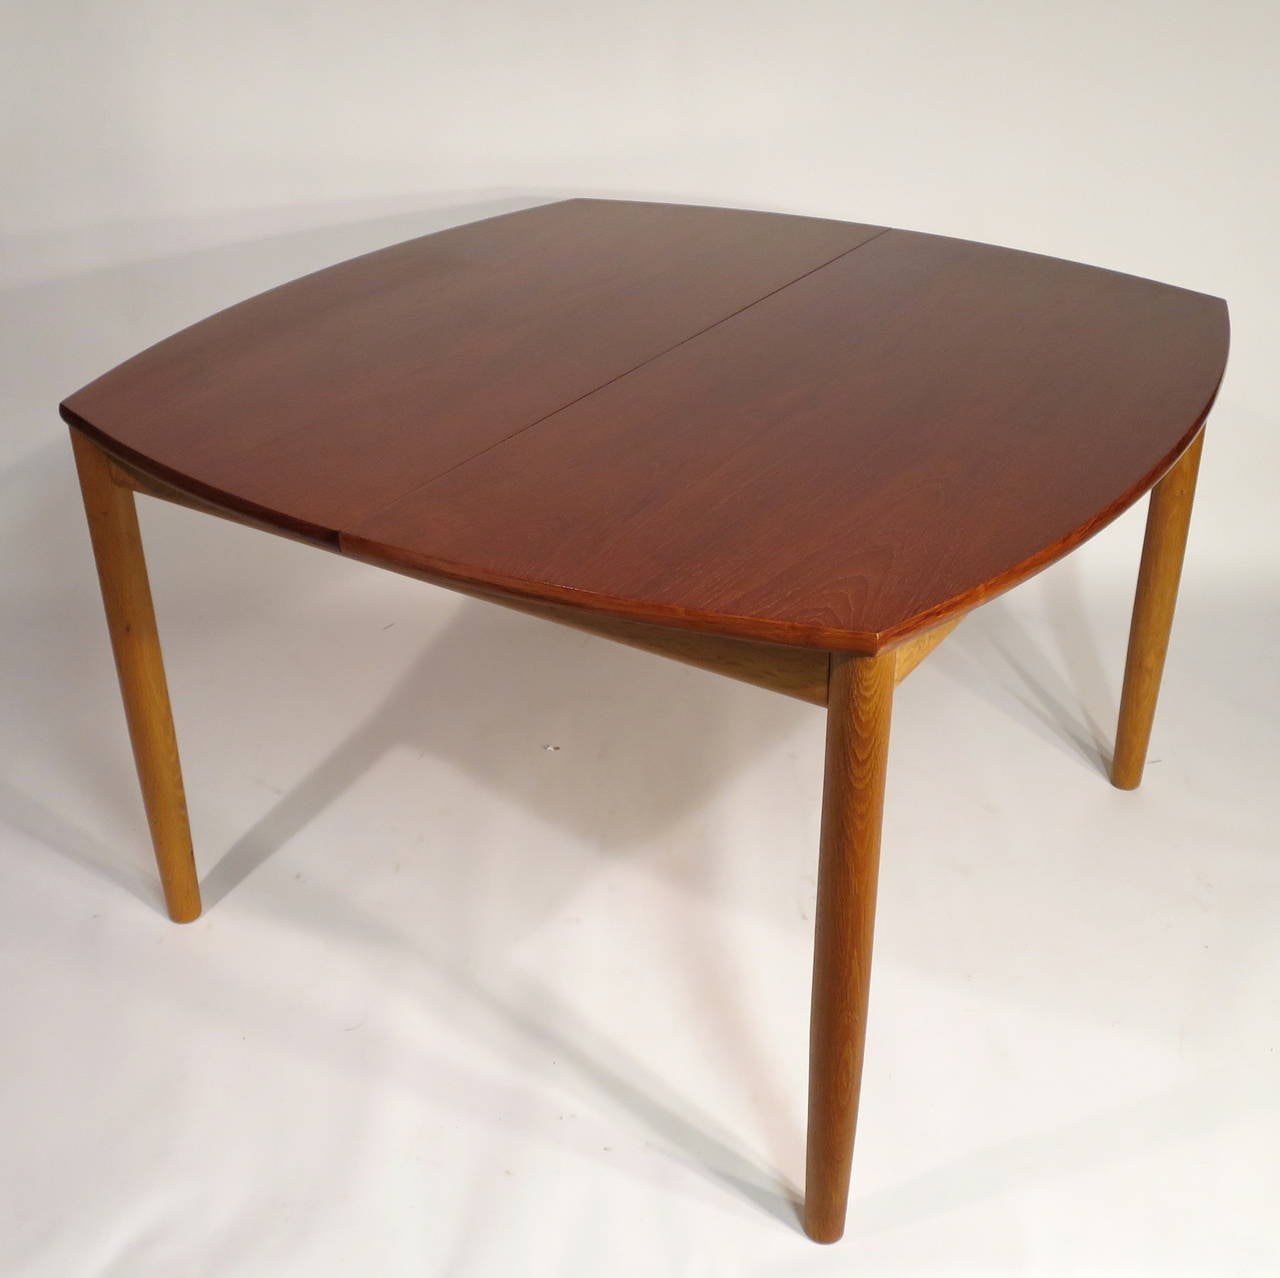 Danish modern draw-leaf dining table by Arne Hovmand Olsen. Teak top with solid oak legs. Made in Denmark, circa 1950s. 
Table was originally paired with six Kurt Ostervig chairs (also available, please message for additional information).